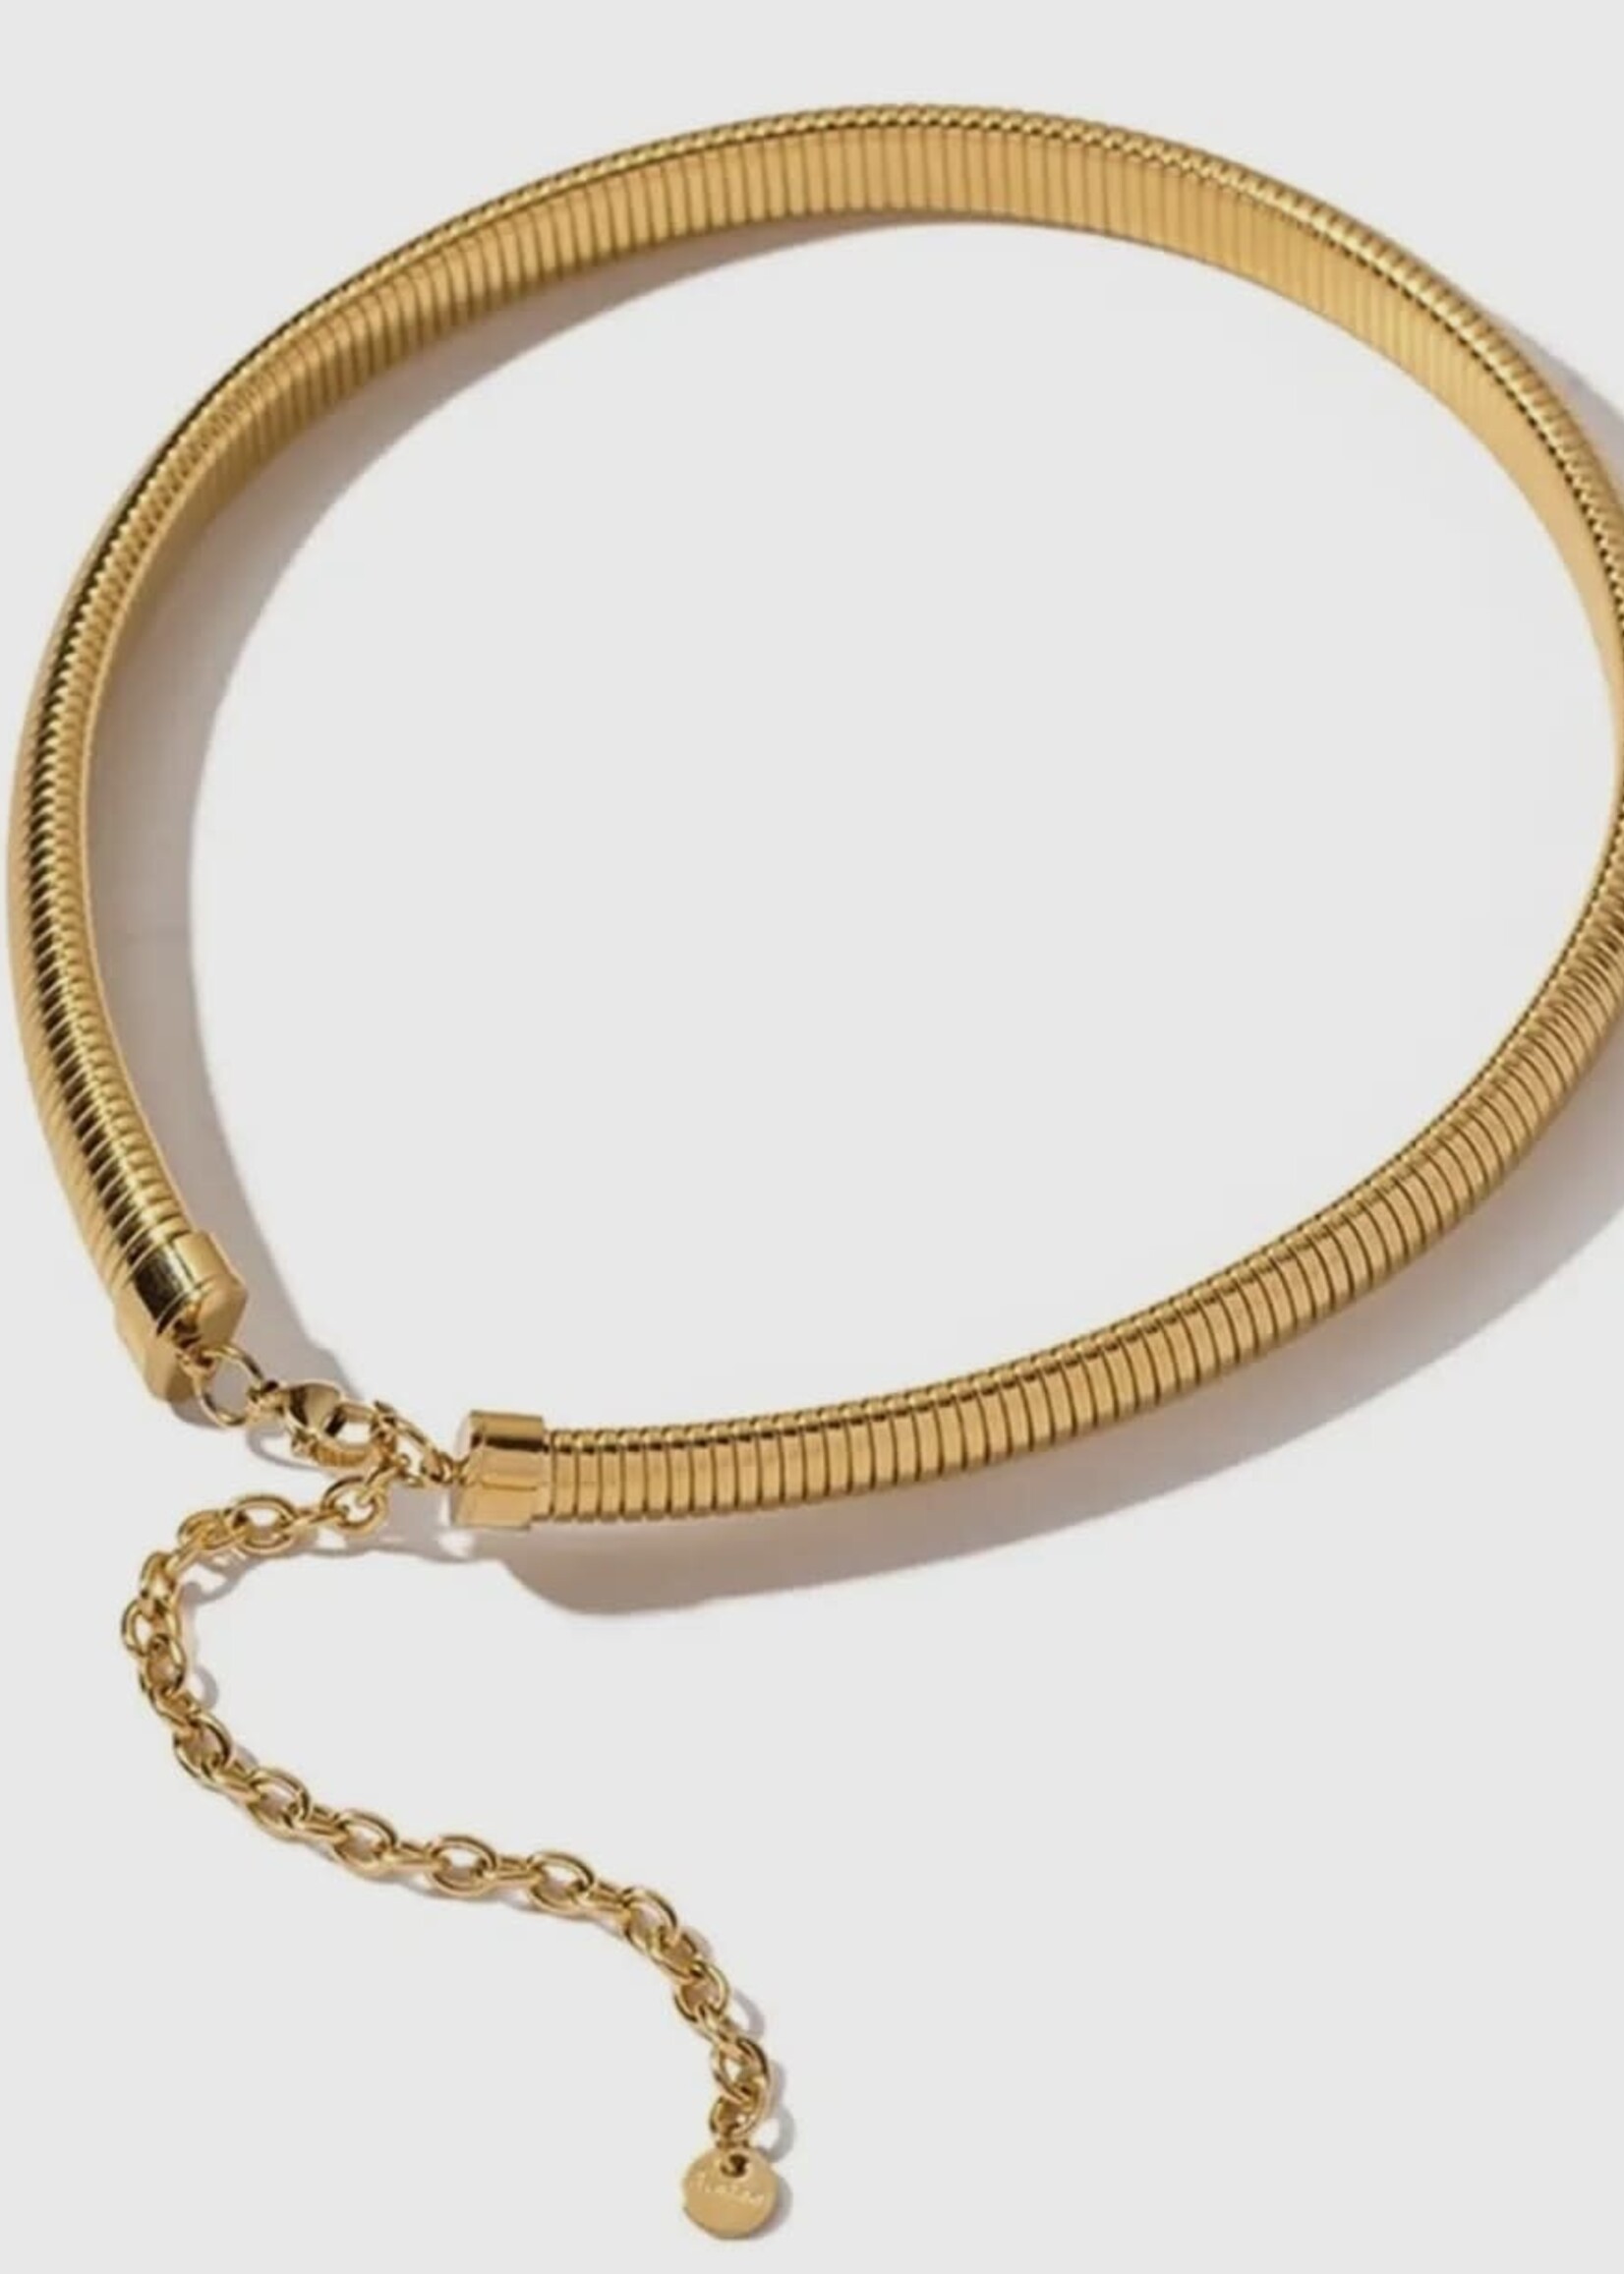 Bloom and Company Bold Snake Chain Necklace